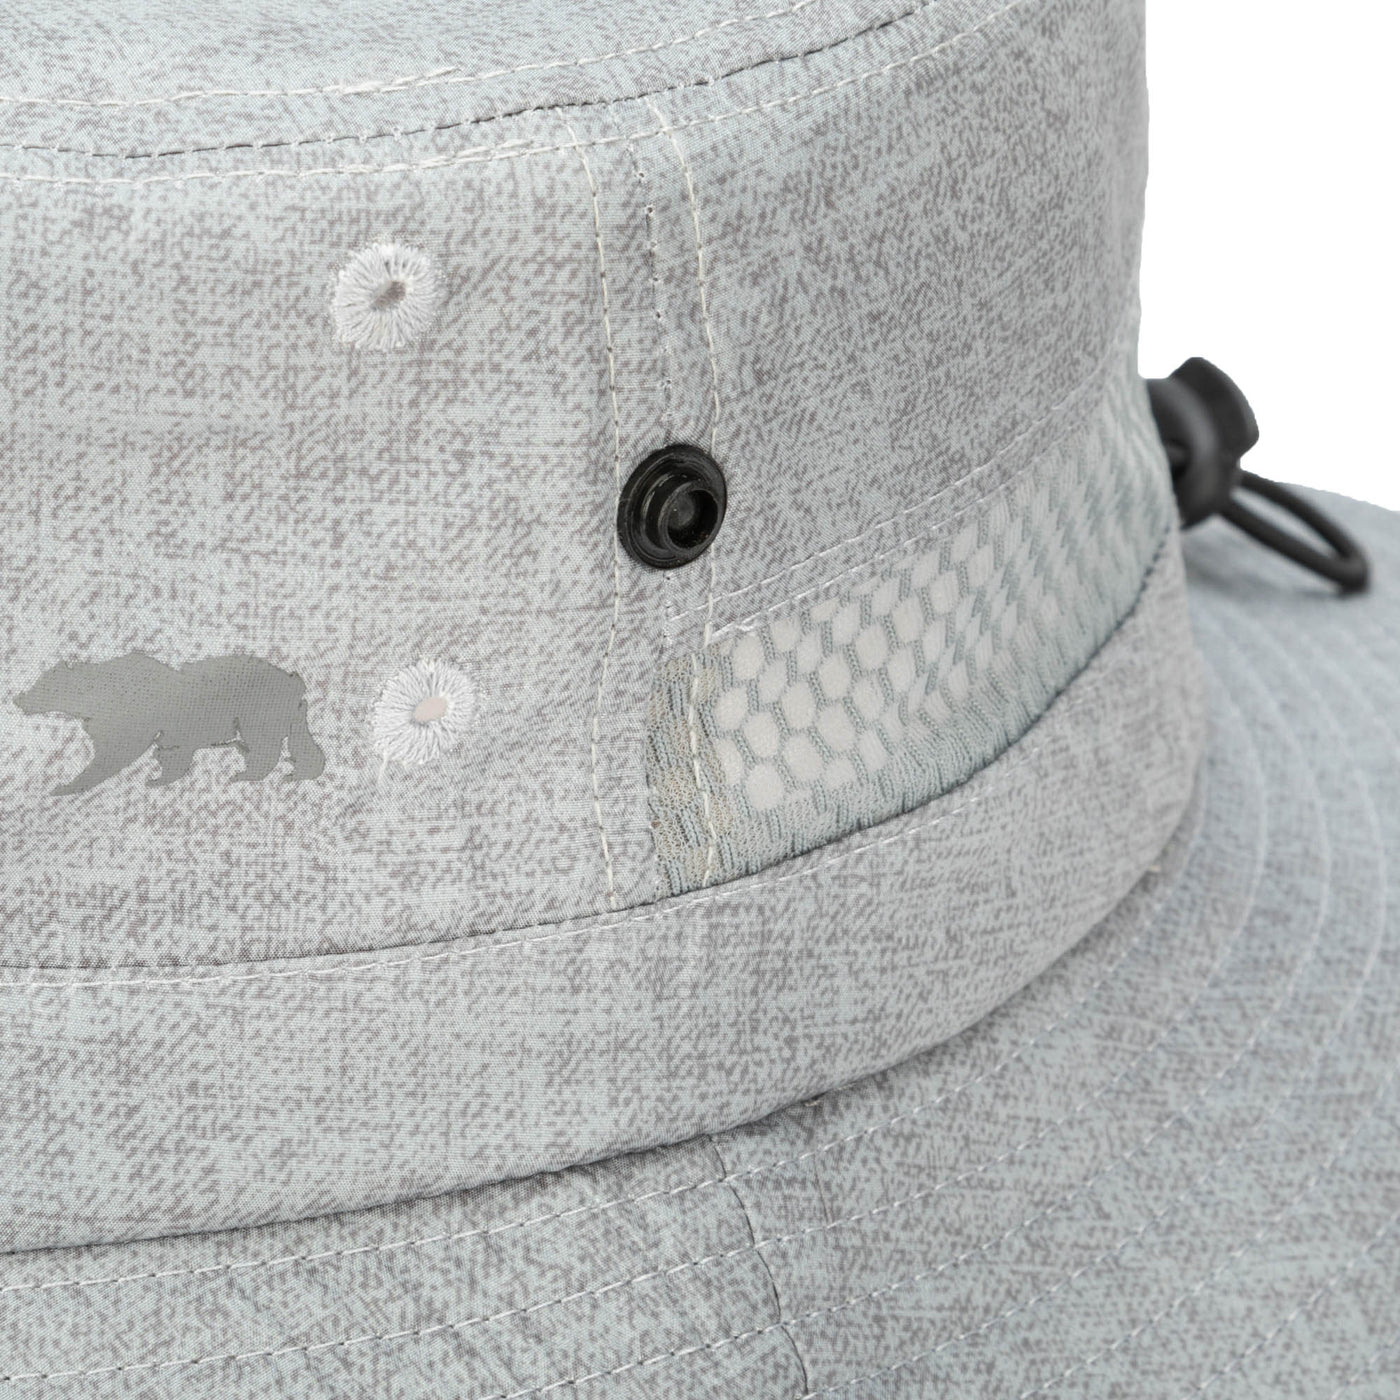 SDHC Outdoor Boonie Hat with Neck Flap and Adjustable Chin Cord Grey